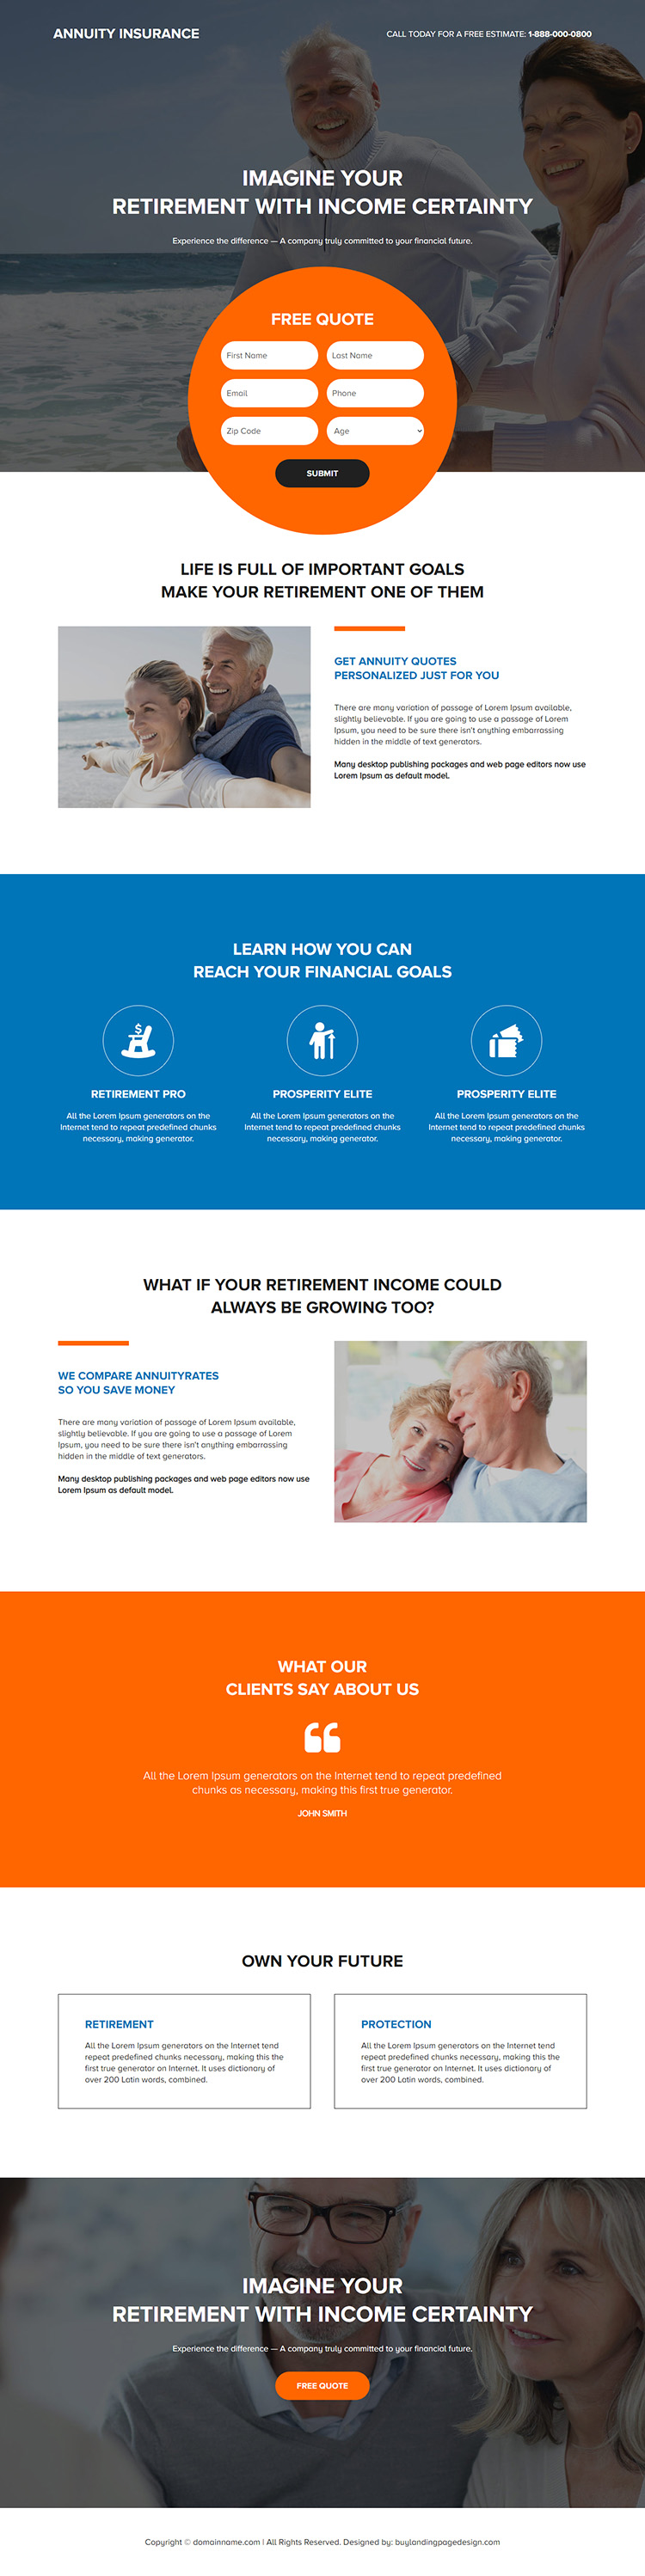 annuity insurance lead capture responsive landing page